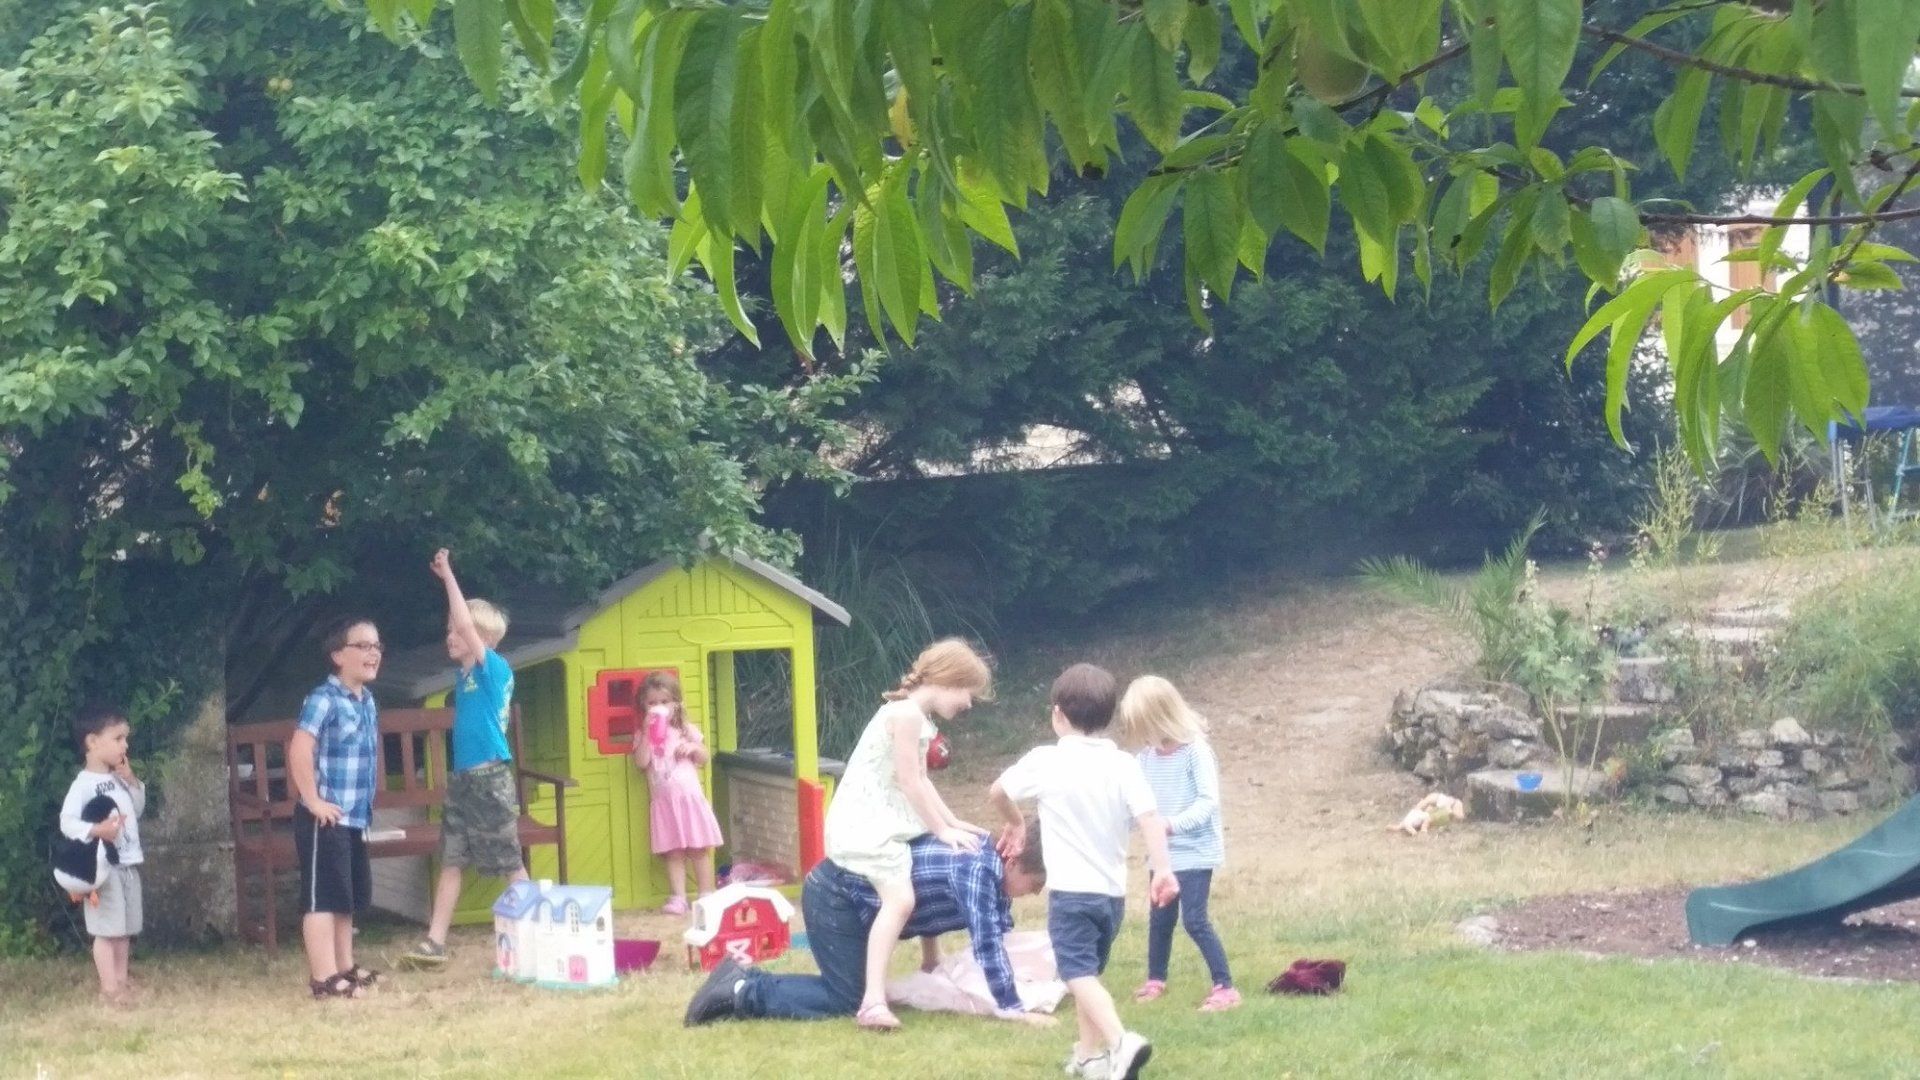 children playing in a garden outside a green playhouse